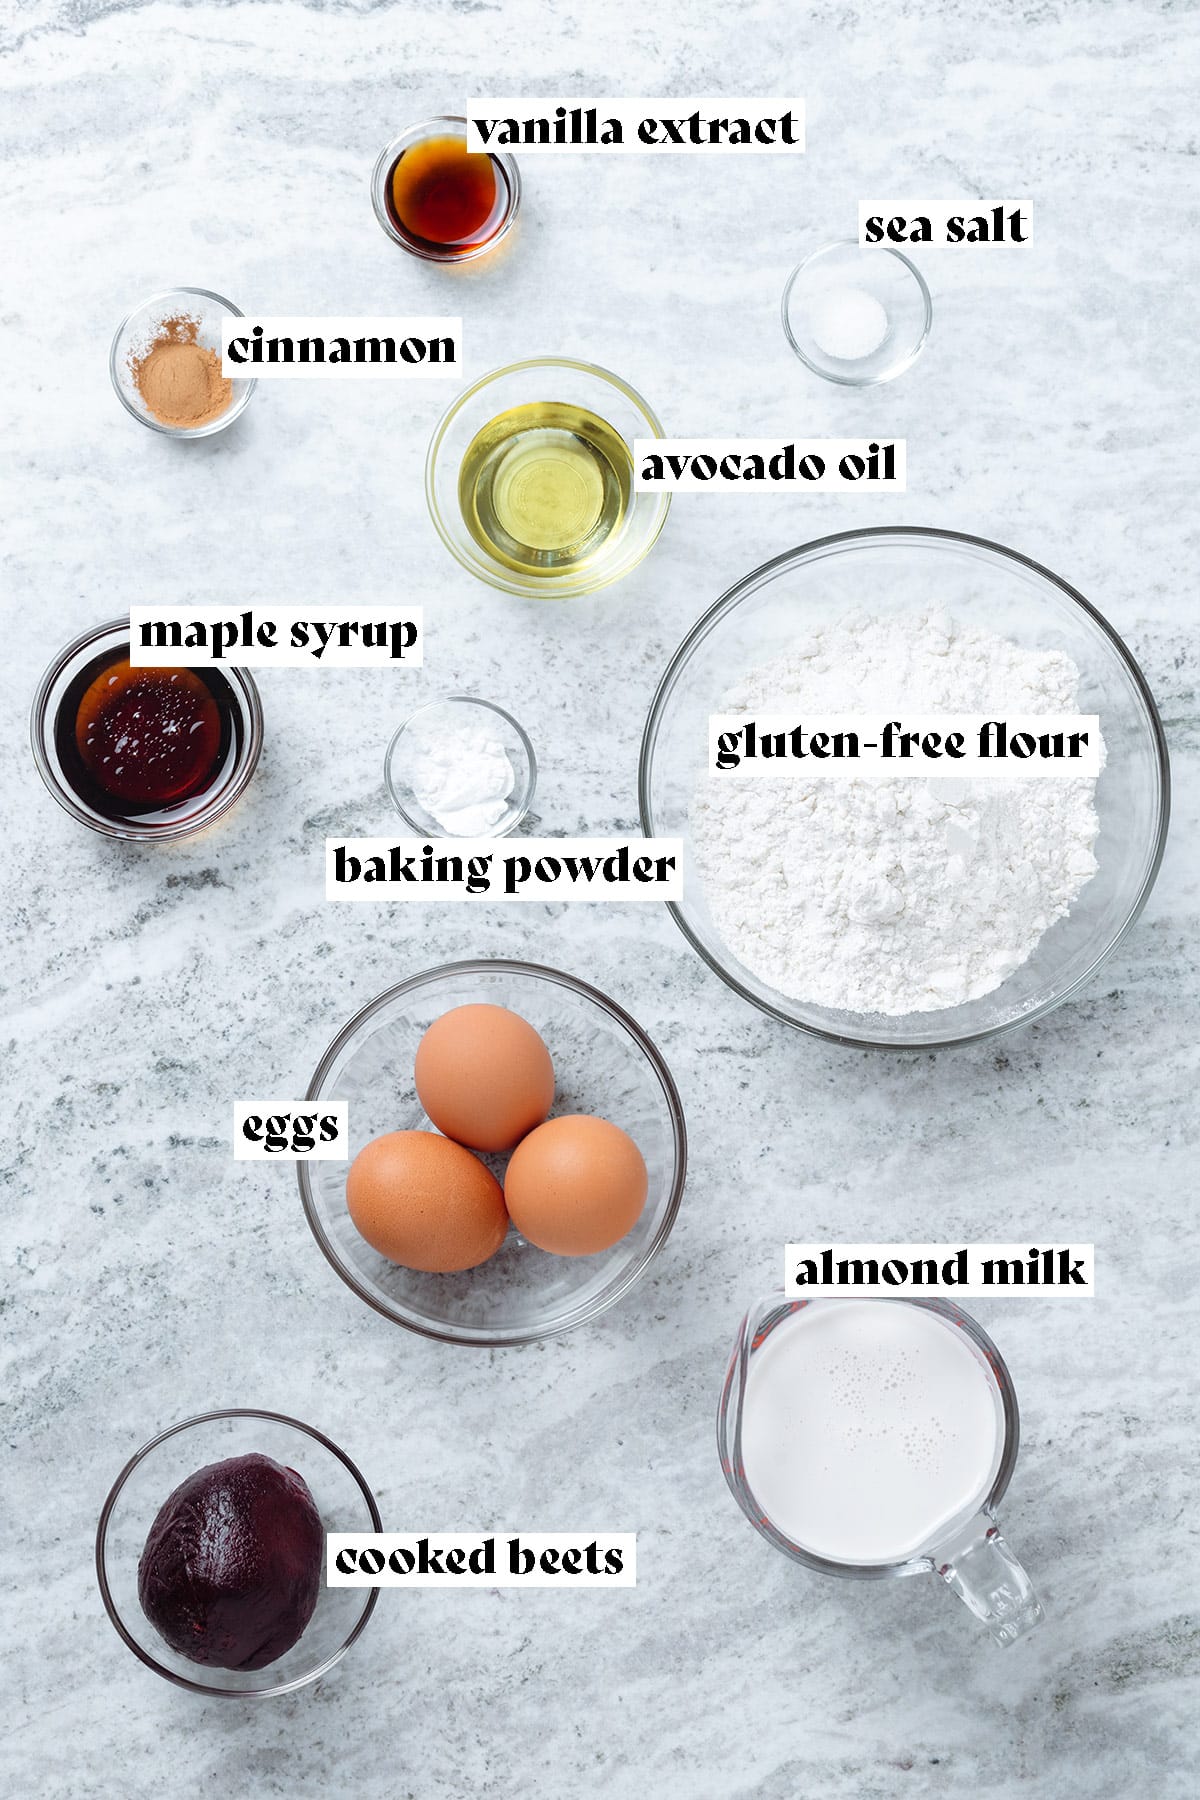 Flour, eggs, milk, a cooked beet, and other ingredients laid out on a stone background with text overlay explaining the ingredients.